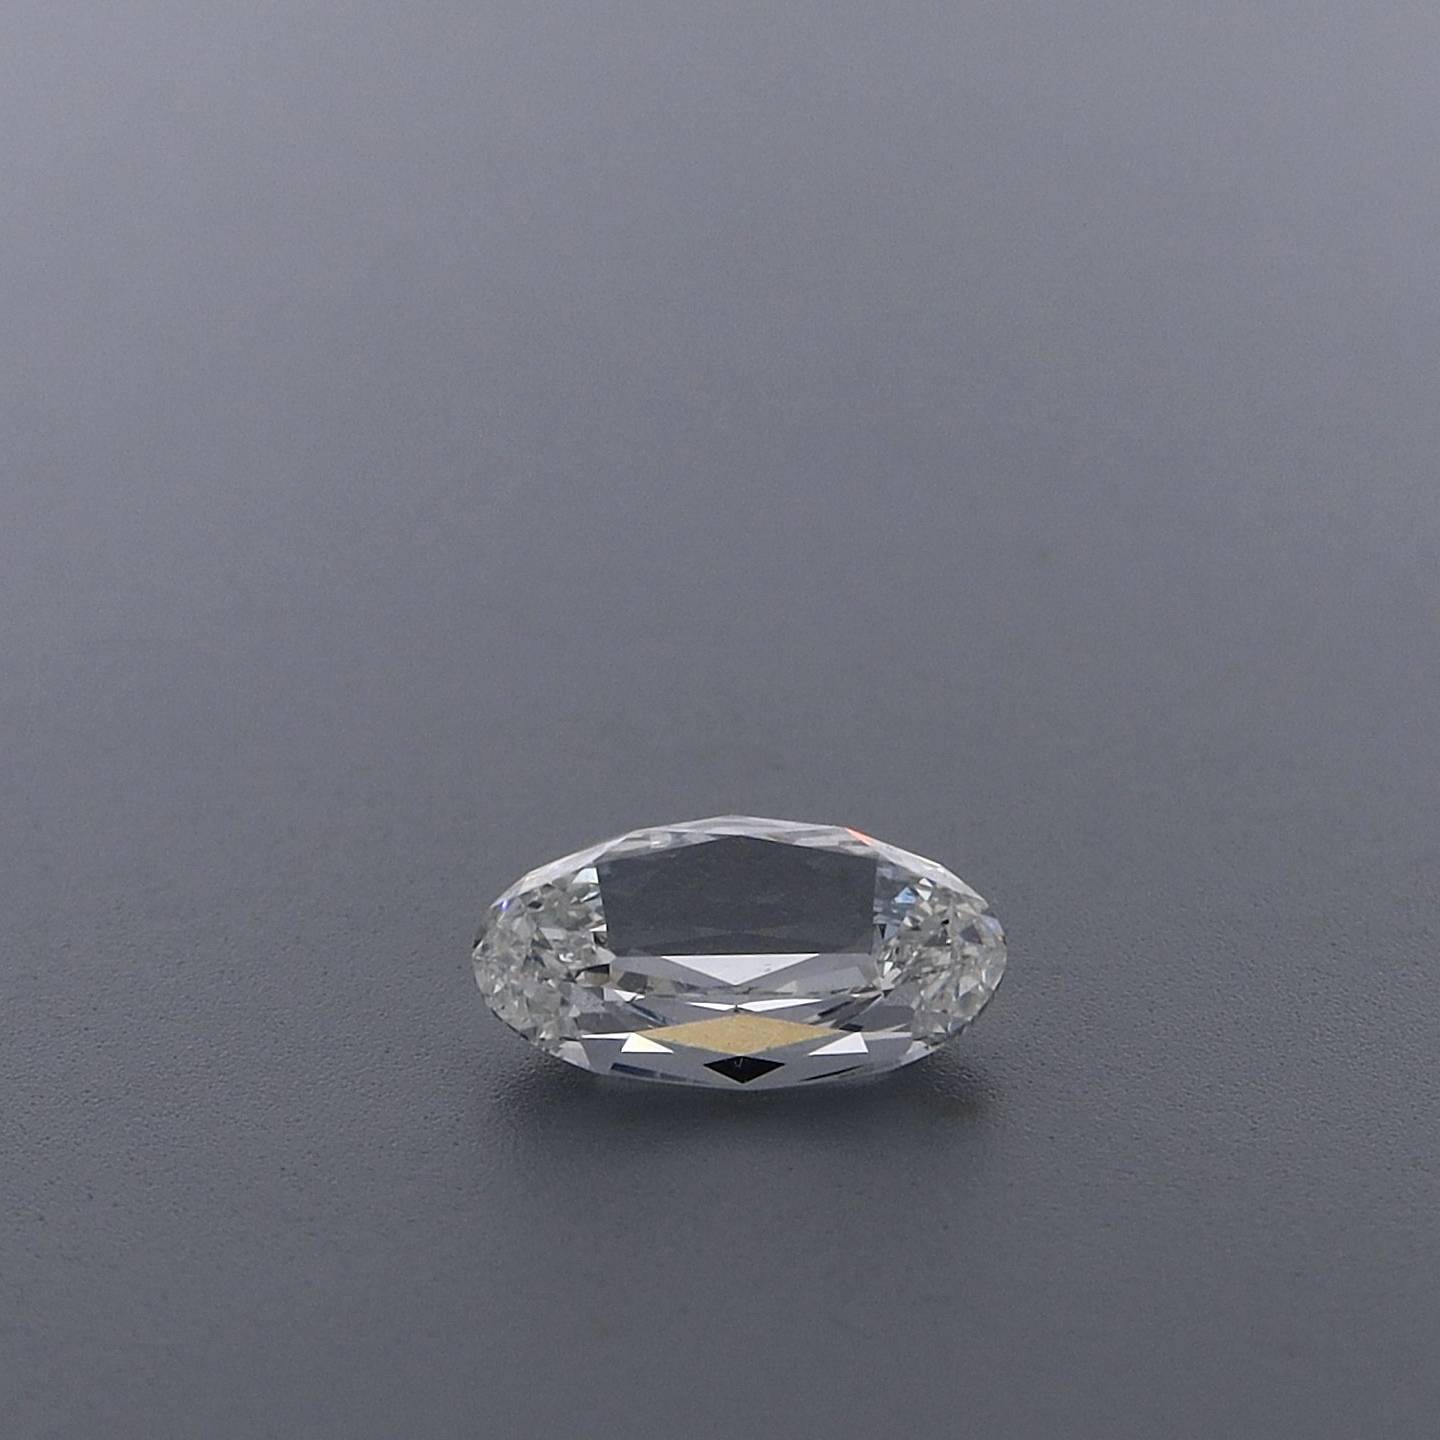 Oval 1.08ct HSI1 Diamond With GIA Cert